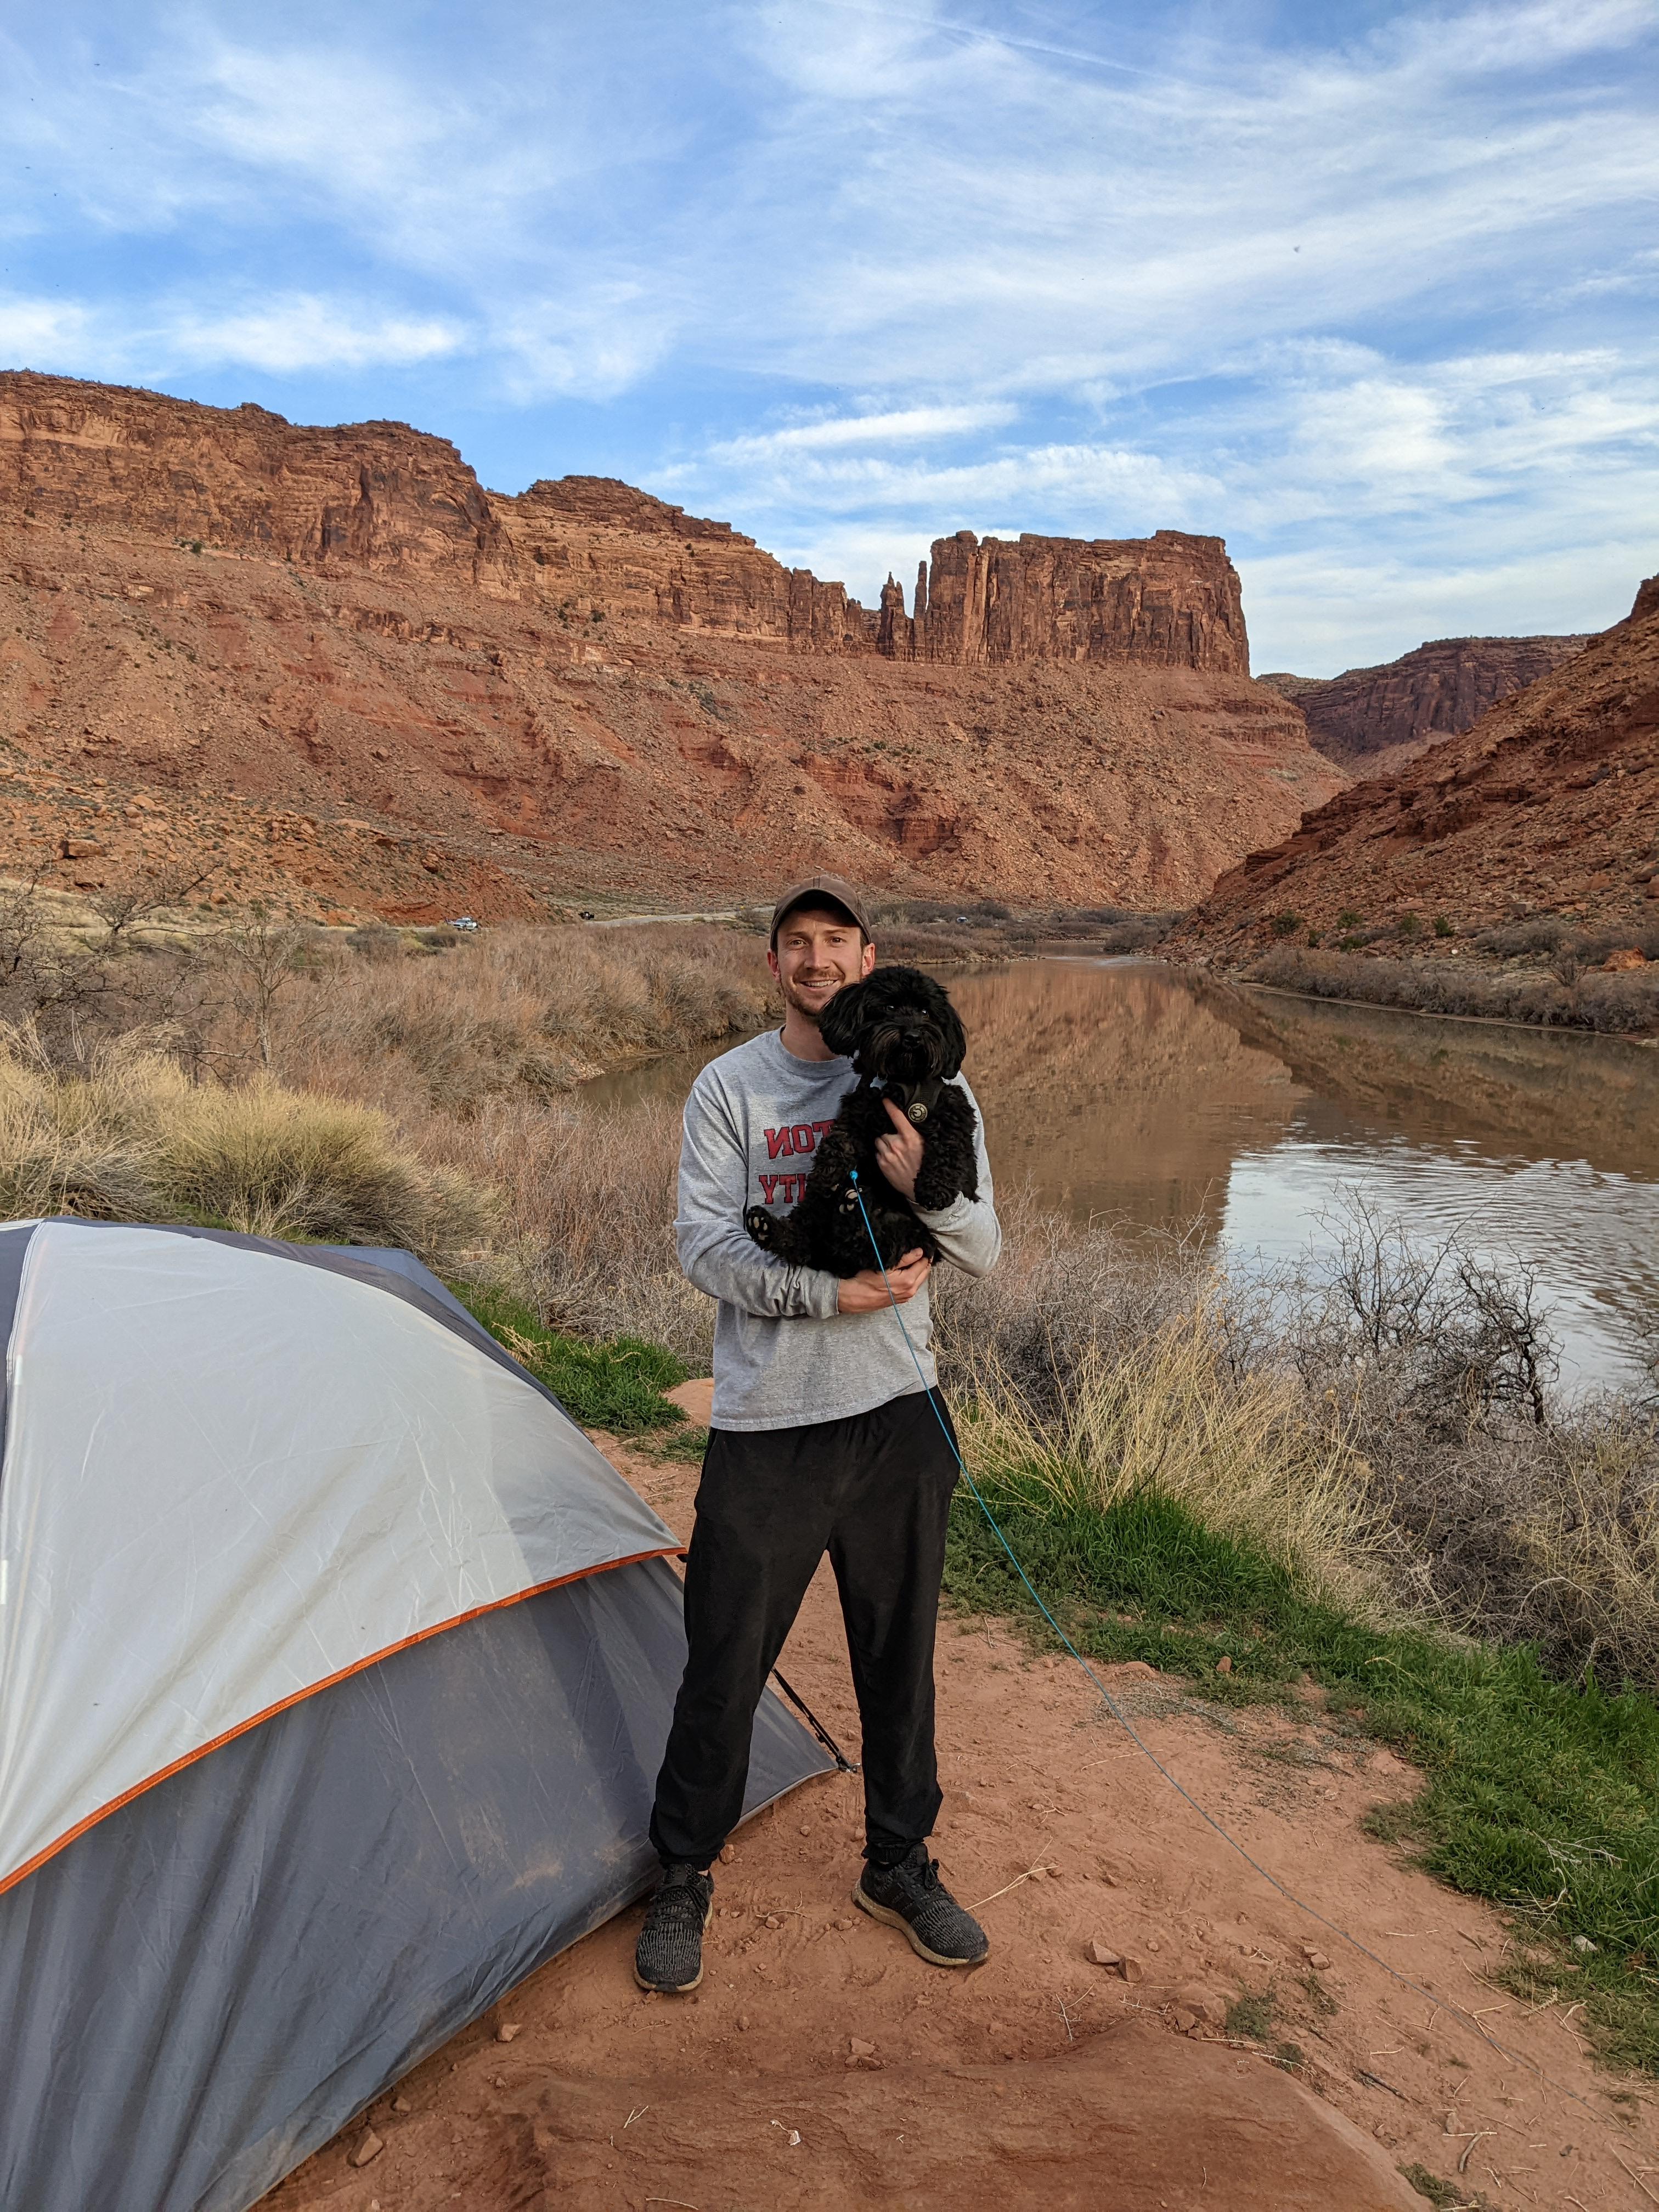 Camping with my dog in beautiful western Colorado!